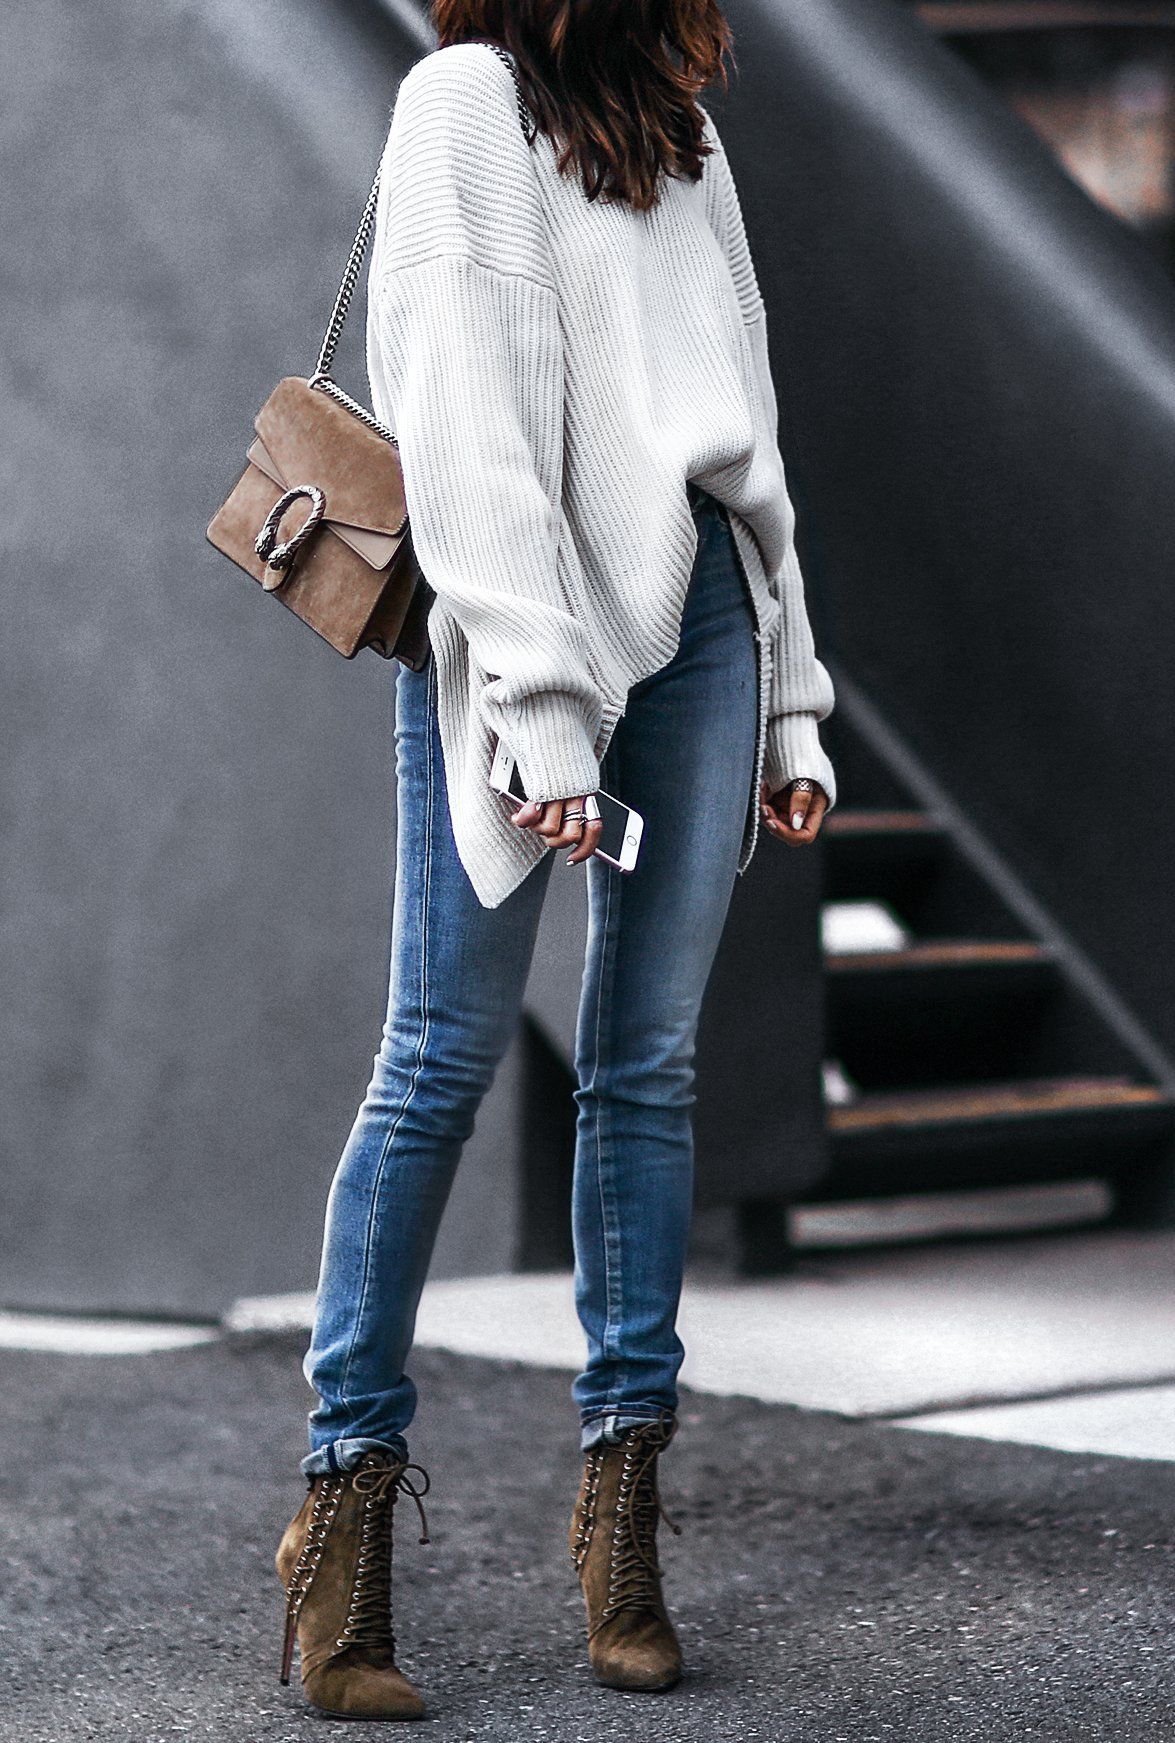 Love this oversized sweater